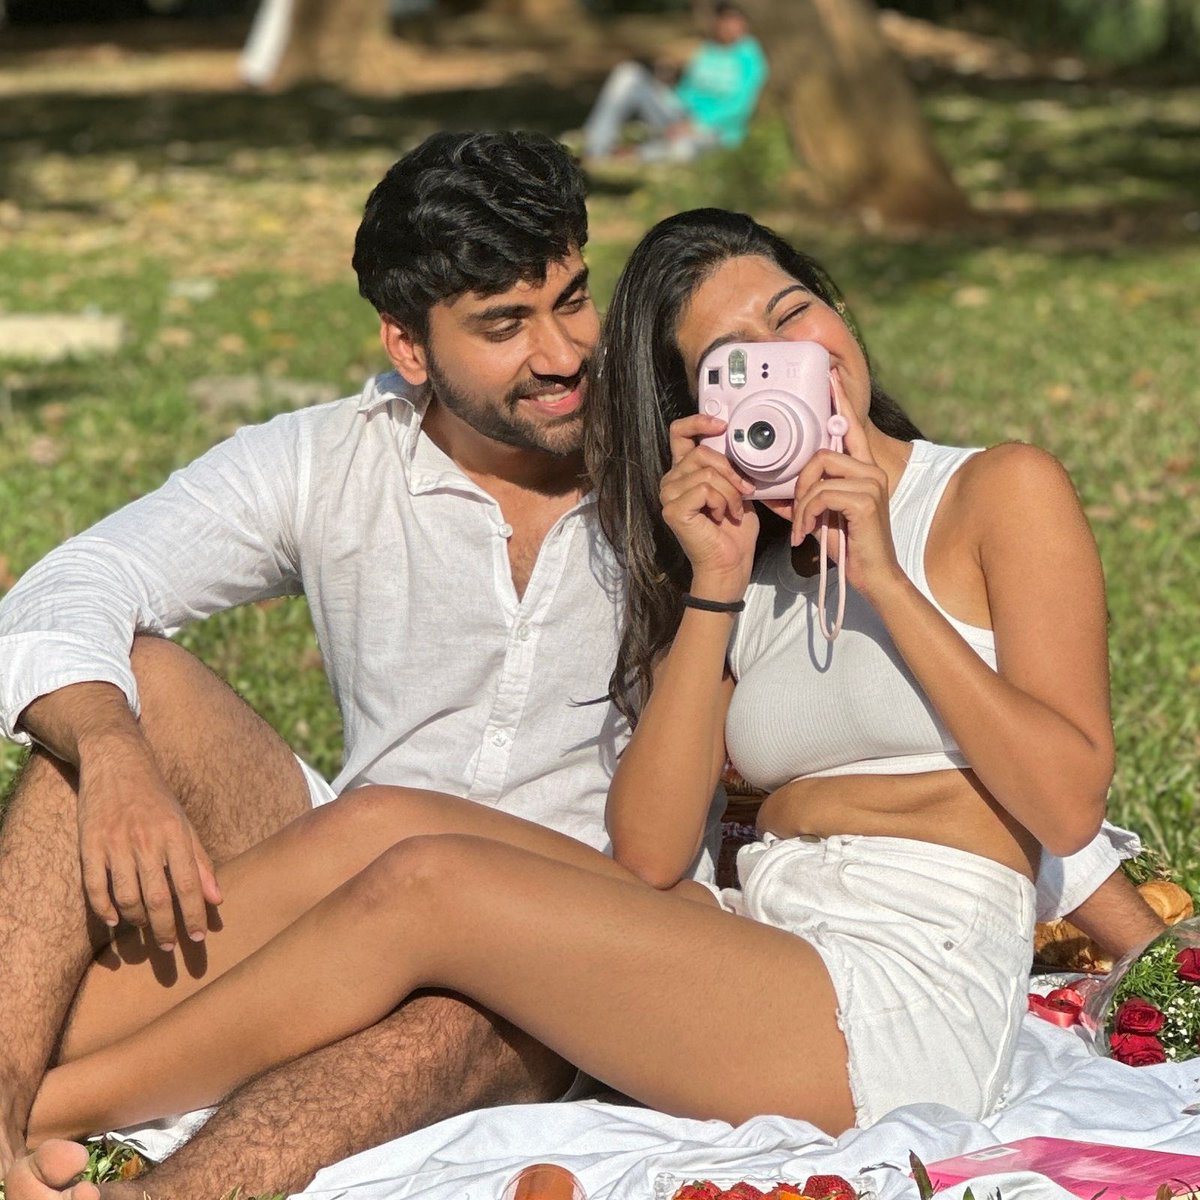 We made sure to capture those live moments with our @instaxindia and instantly kept the photos in our wallets to keep the memories close. #instax #instaxindia #loveineveryframe #ValentinesDay